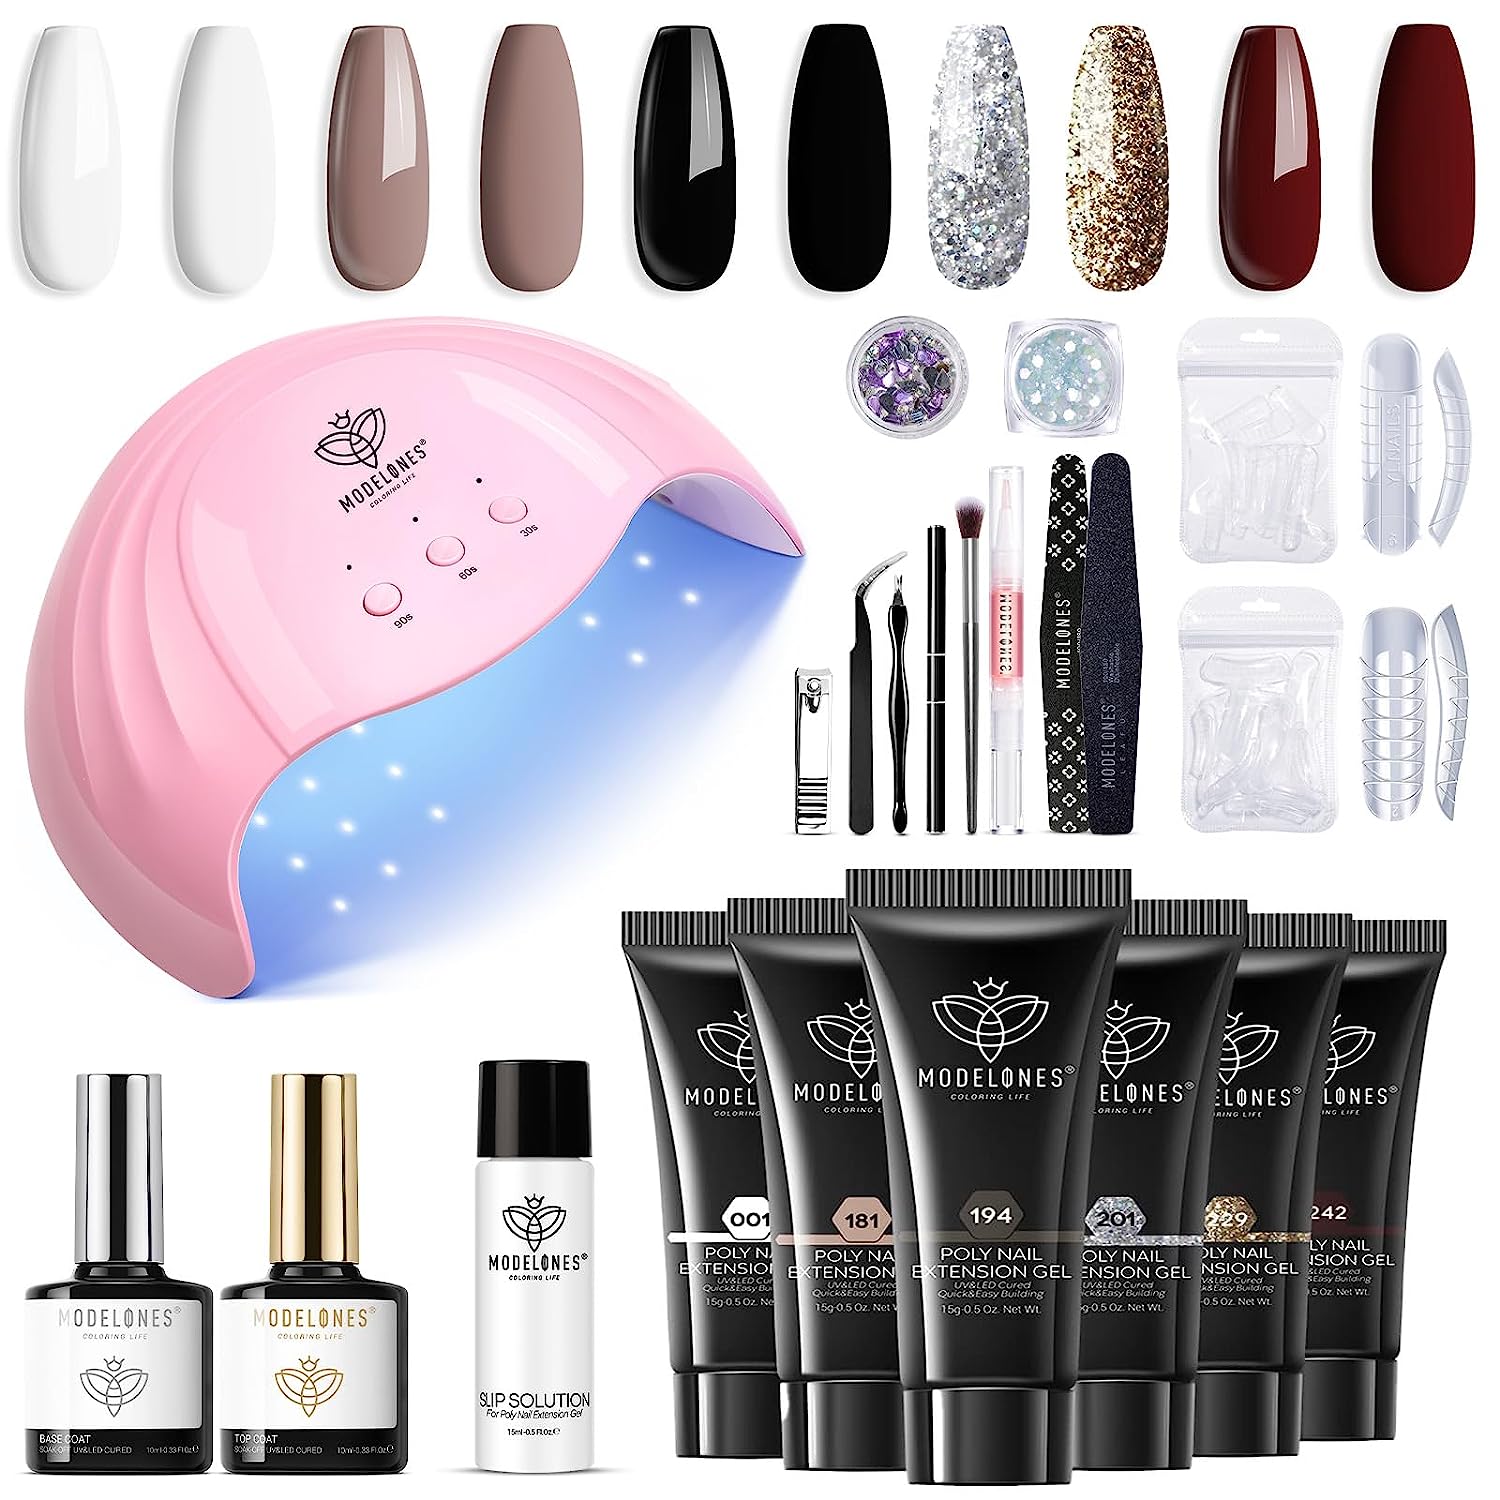 Buy POLYGEL NAIL EXTENSION KIT BEGINNERS KIT- WITH FULL SIZE UV LAMP- ONE  POLYGEL TUBES -30 GM, TOP CO AT BASE CO AT, 100 POLYGEL MOULDS BUFFER  POLYGEL TOOL WITH SLICE AND